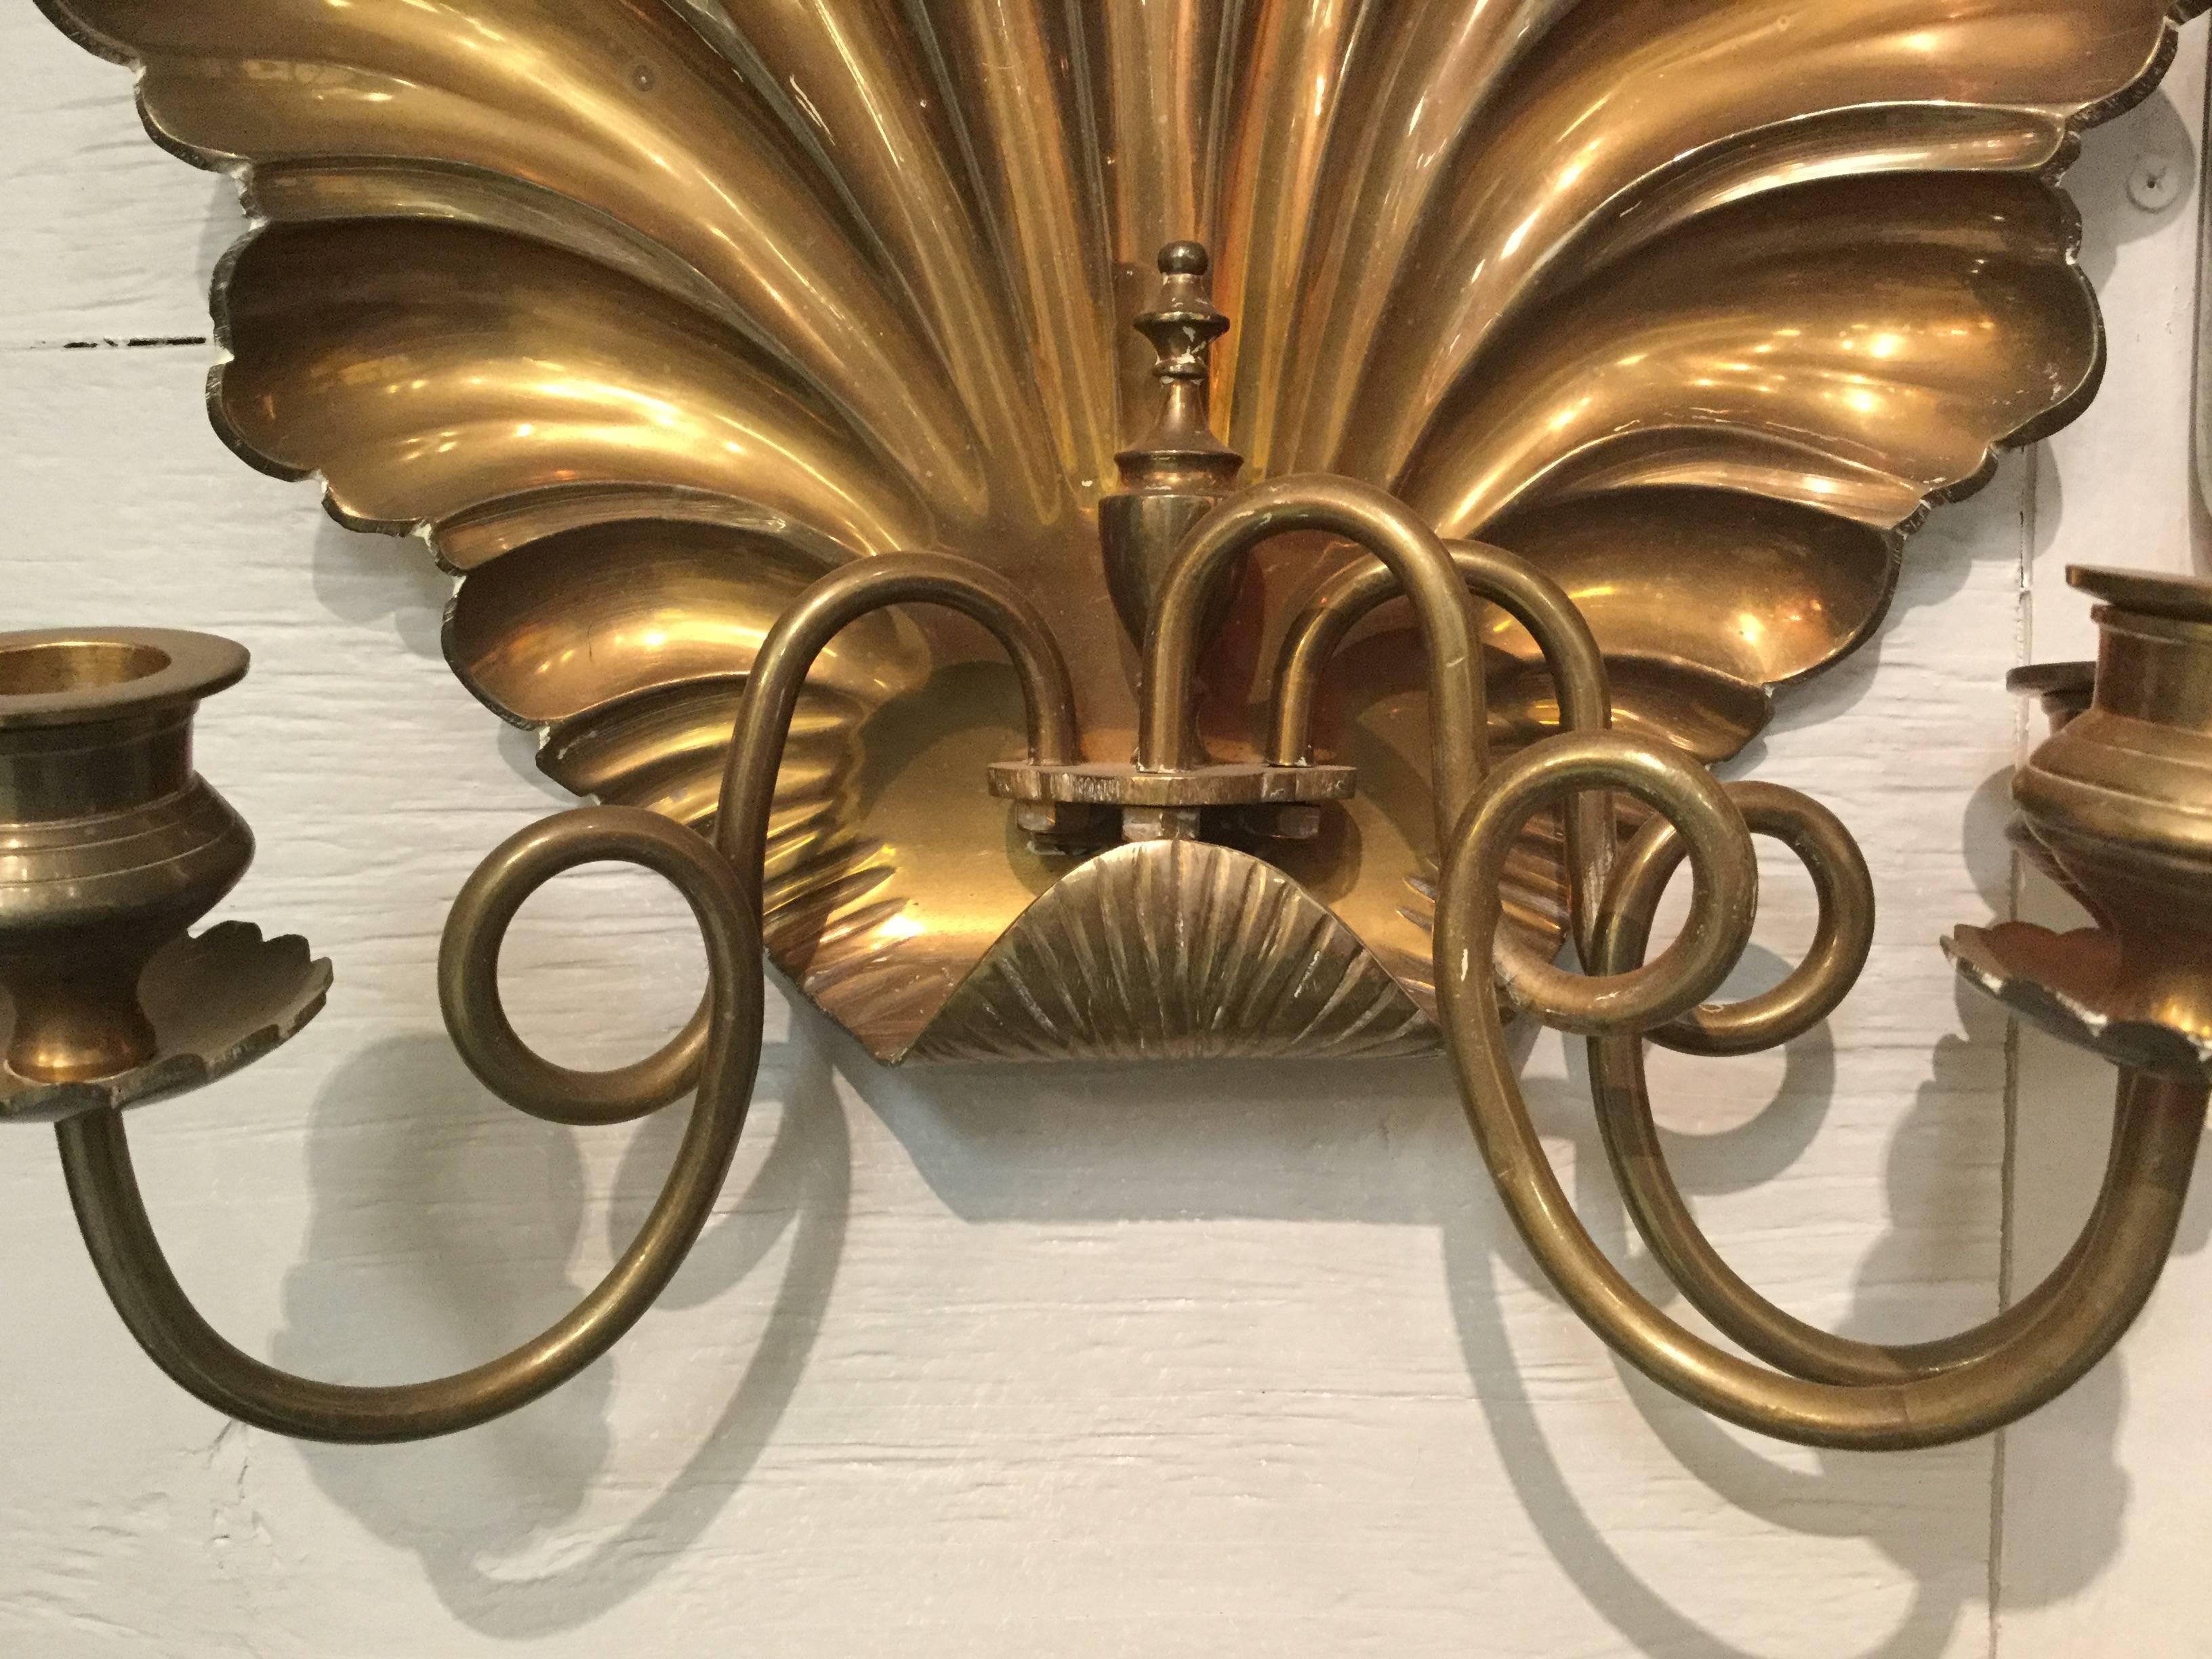 Very well-made and beautifully formed pair of European brass shell sconces, imported by Nora Fenton.